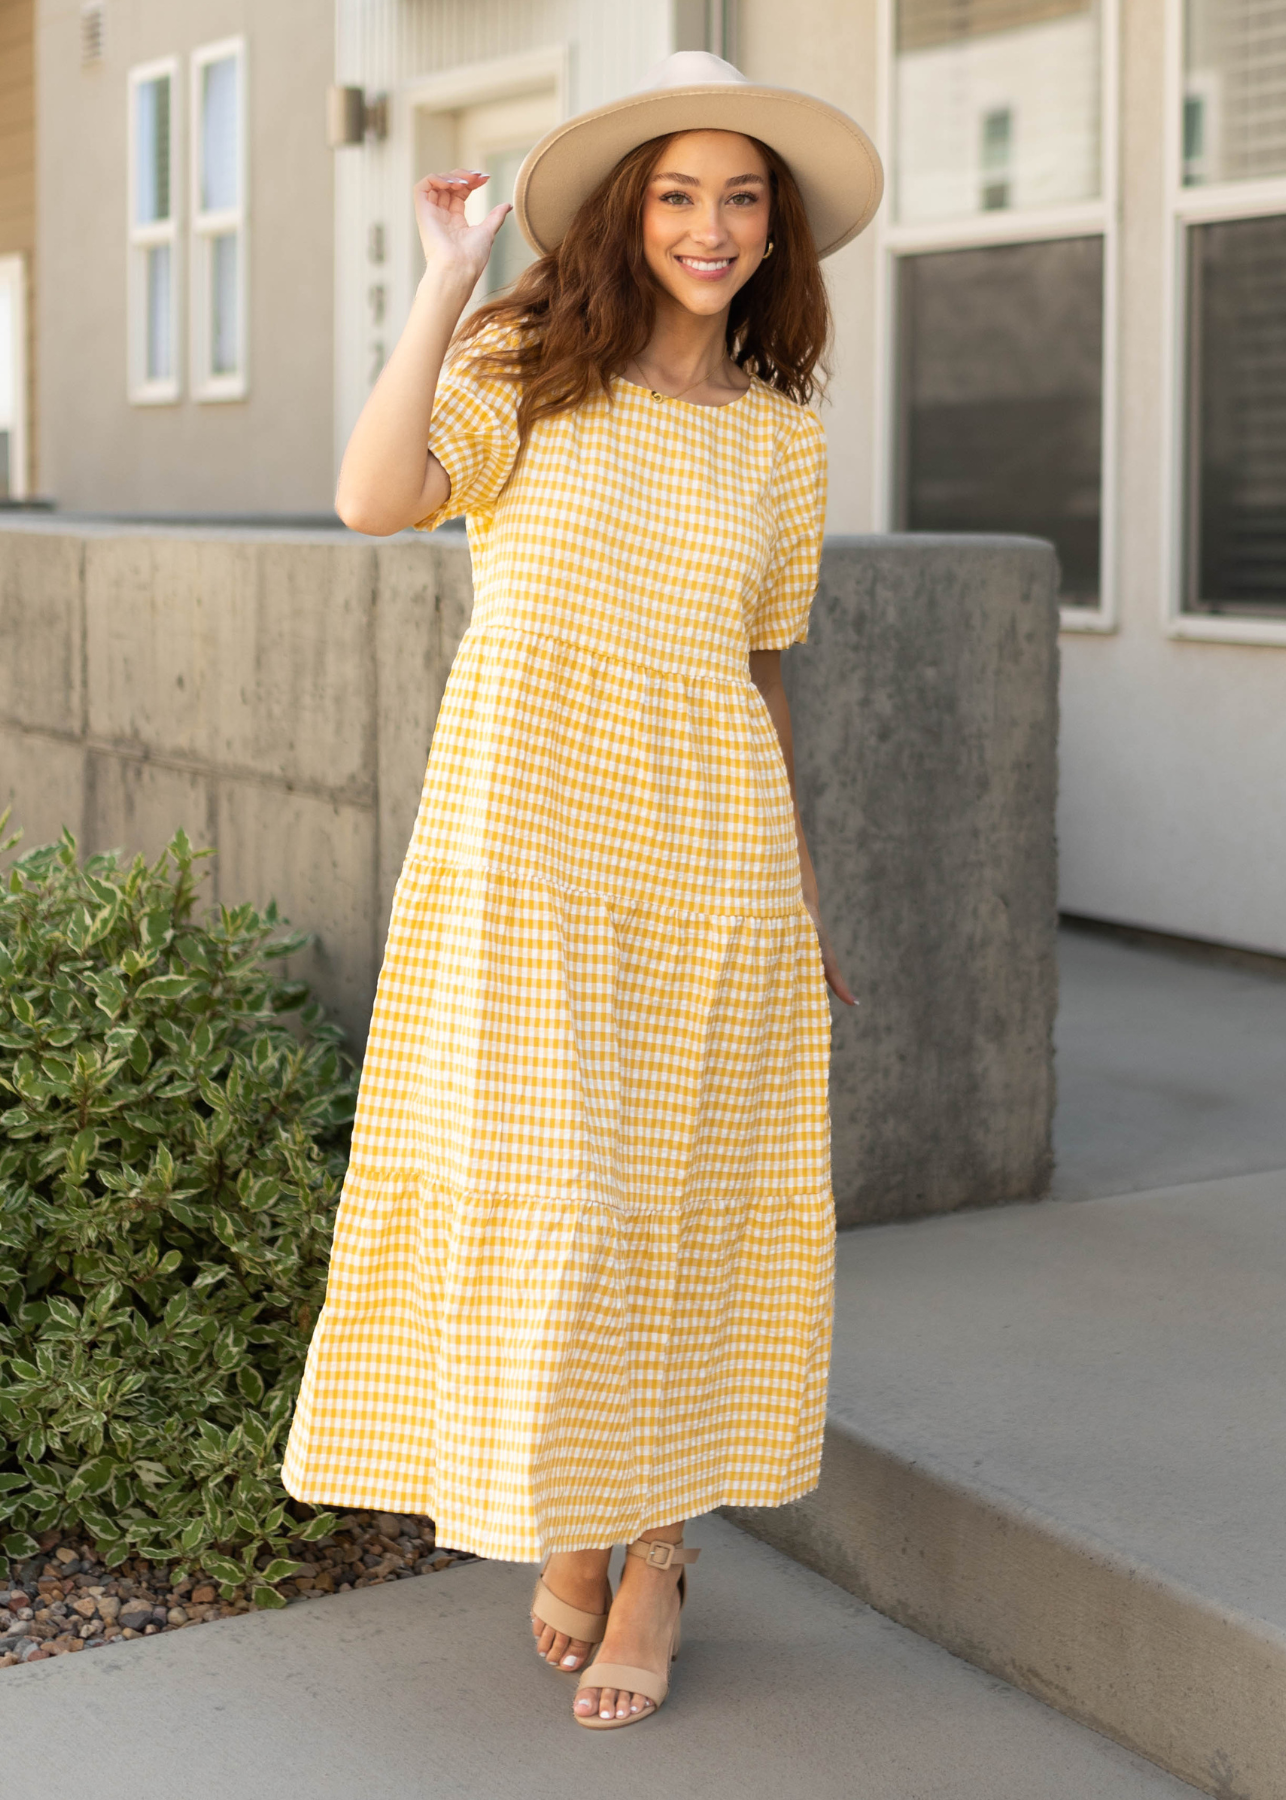 Short sleeve yellow dress with checkered pattern